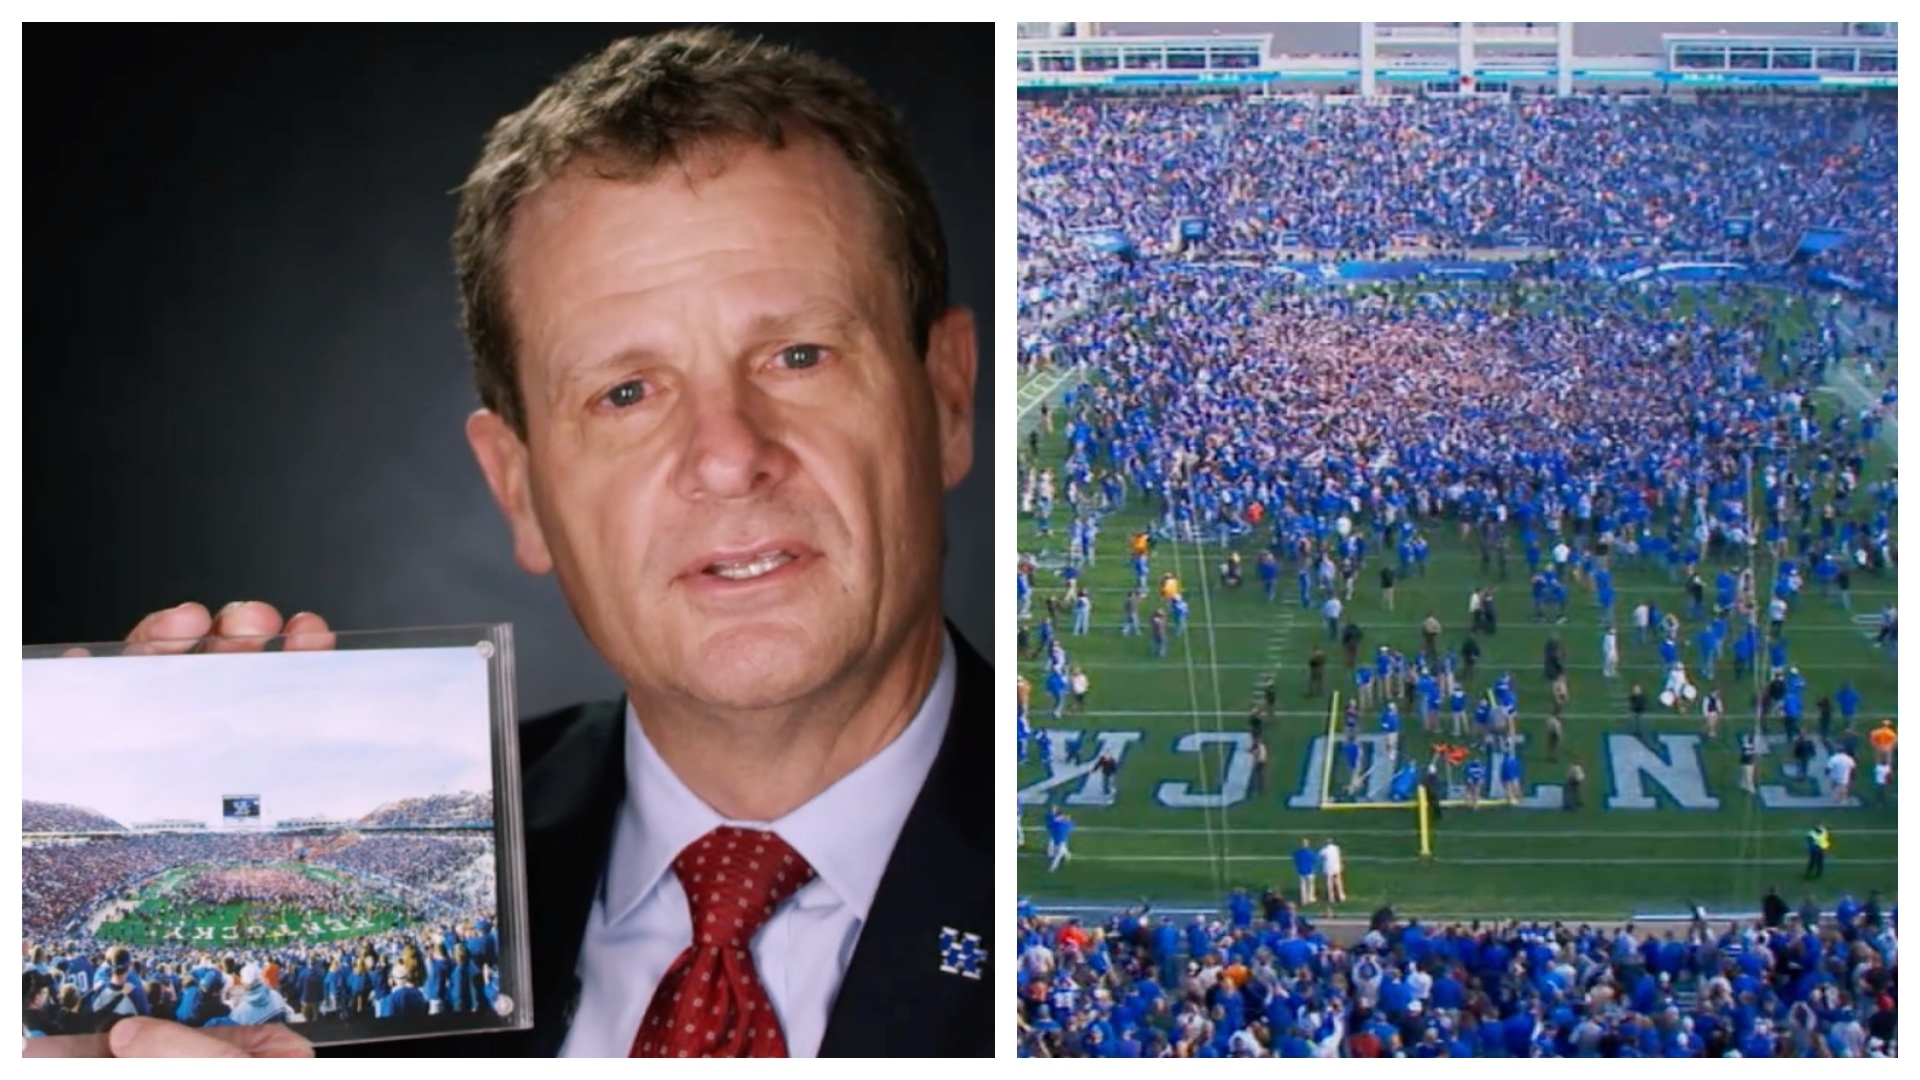 Kentucky photo captures a magic moment that make CFB special